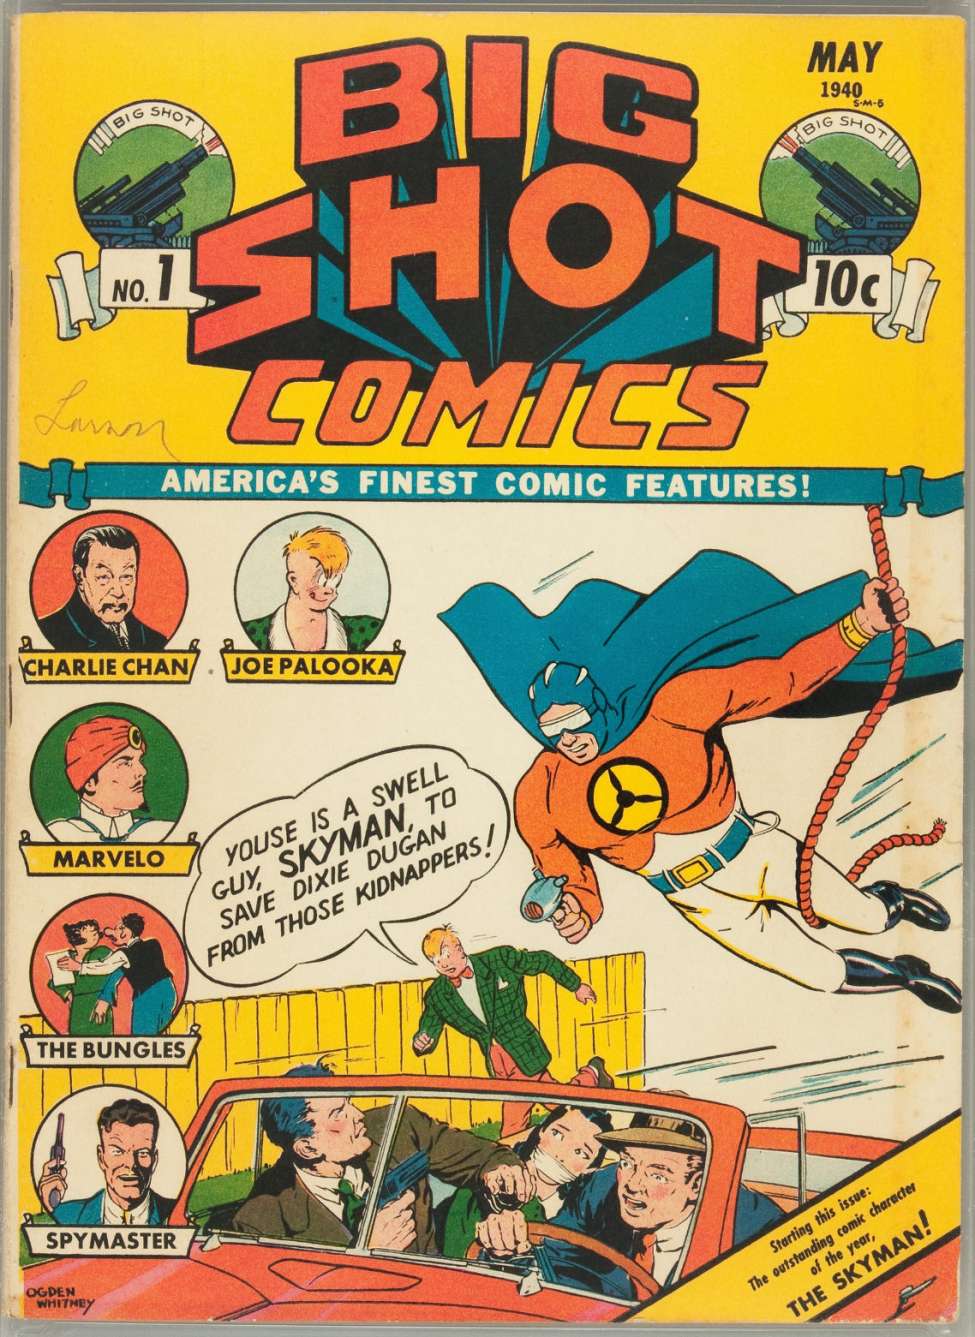 Book Cover For Big Shot 1 - Version 1